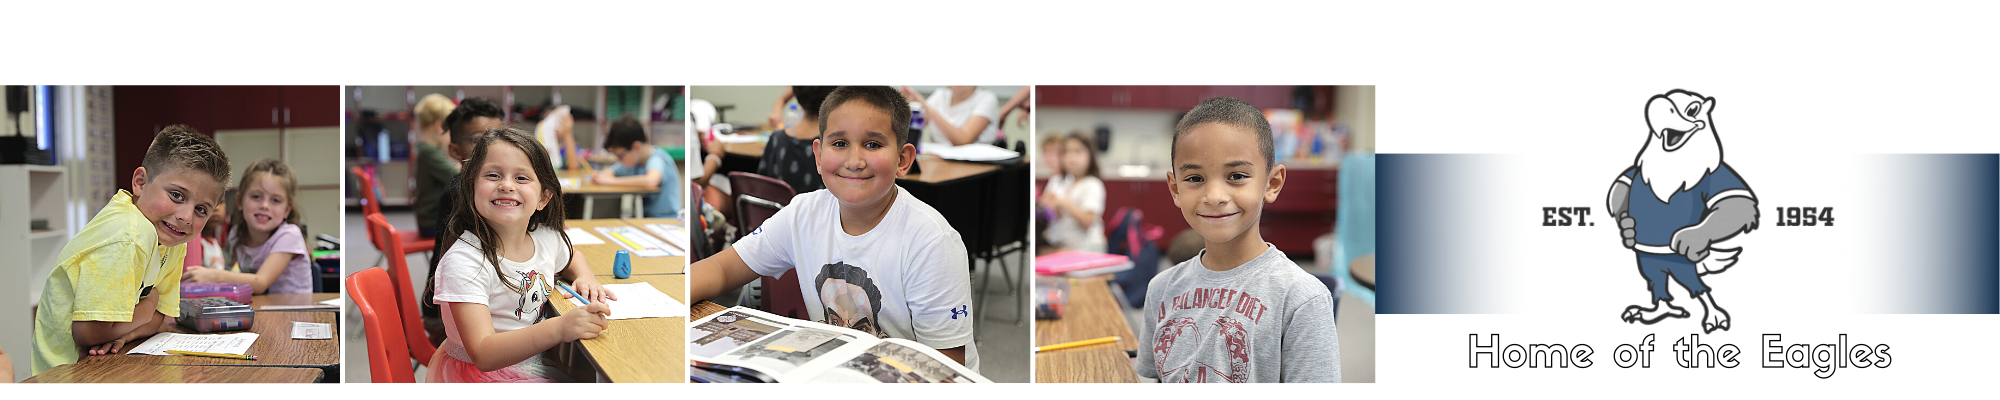 Students smiling while learning in classrooms and Home of the Eagles established in 1954 eagle mascot 